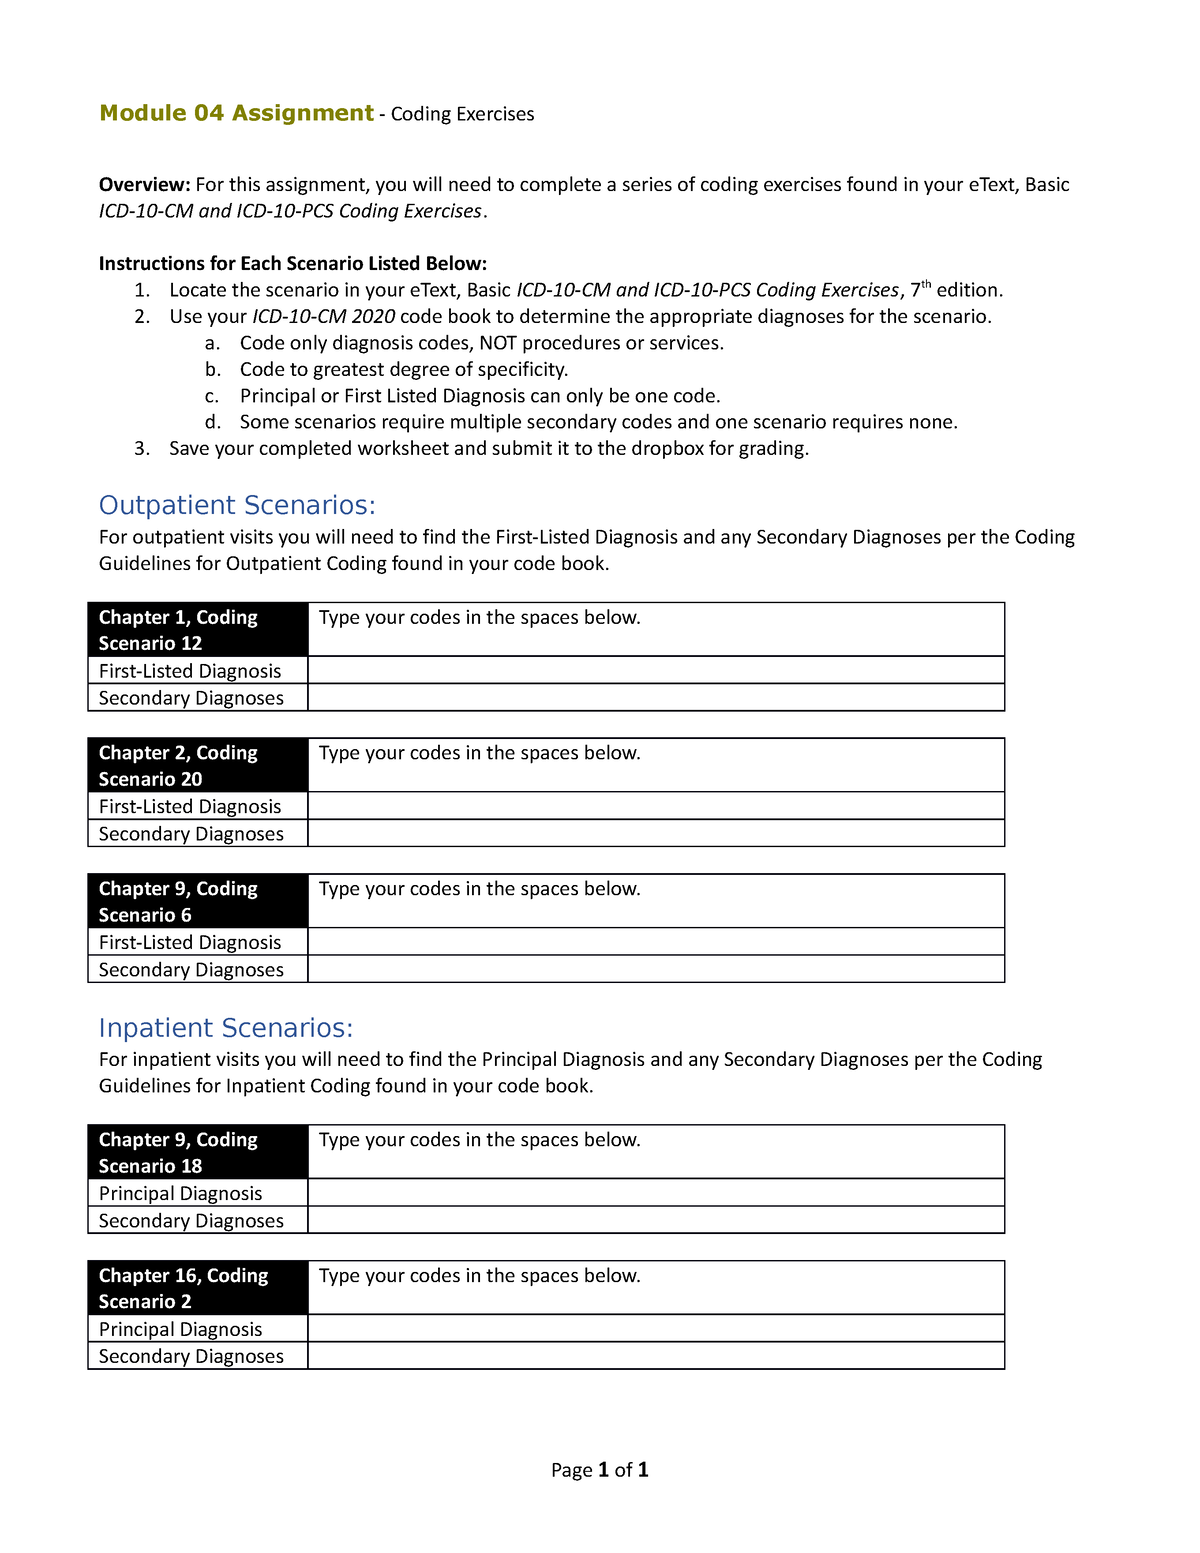 Download Coding Exercises Worksheet - Module 04 Assignment - Coding ...